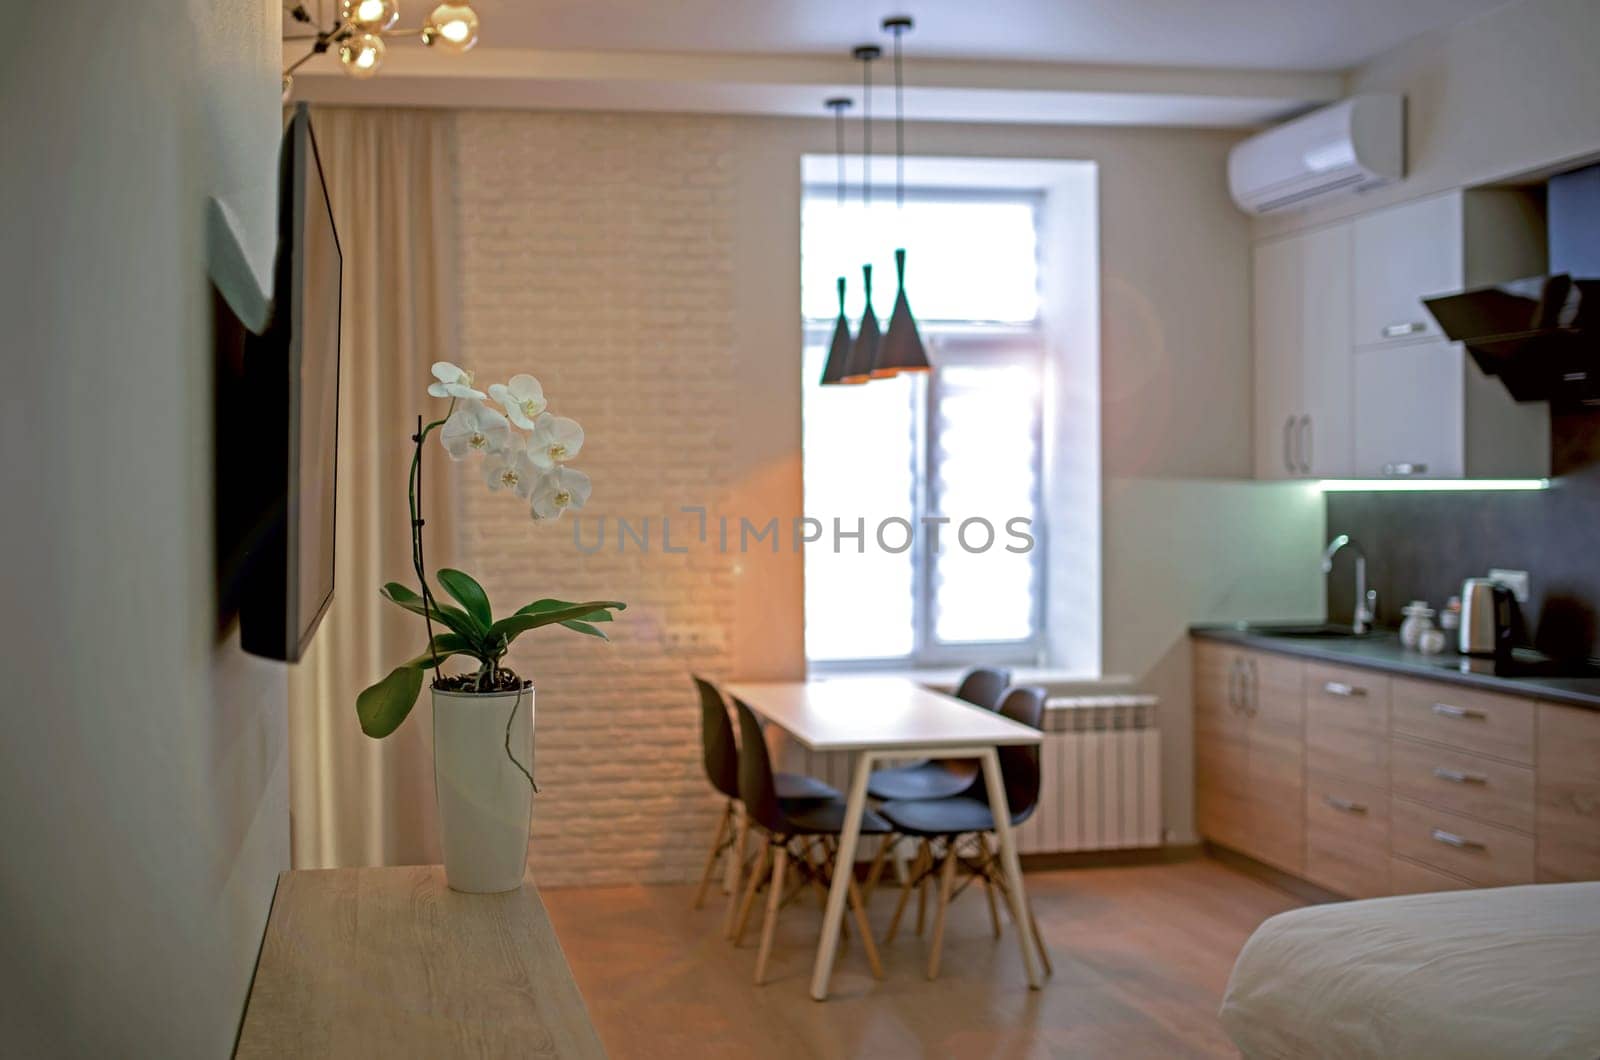 Small room with a sofa and kitchen set. Interior living room and kitchen. Interior of compact small house. Interior cottage Cooking area next to sofa.